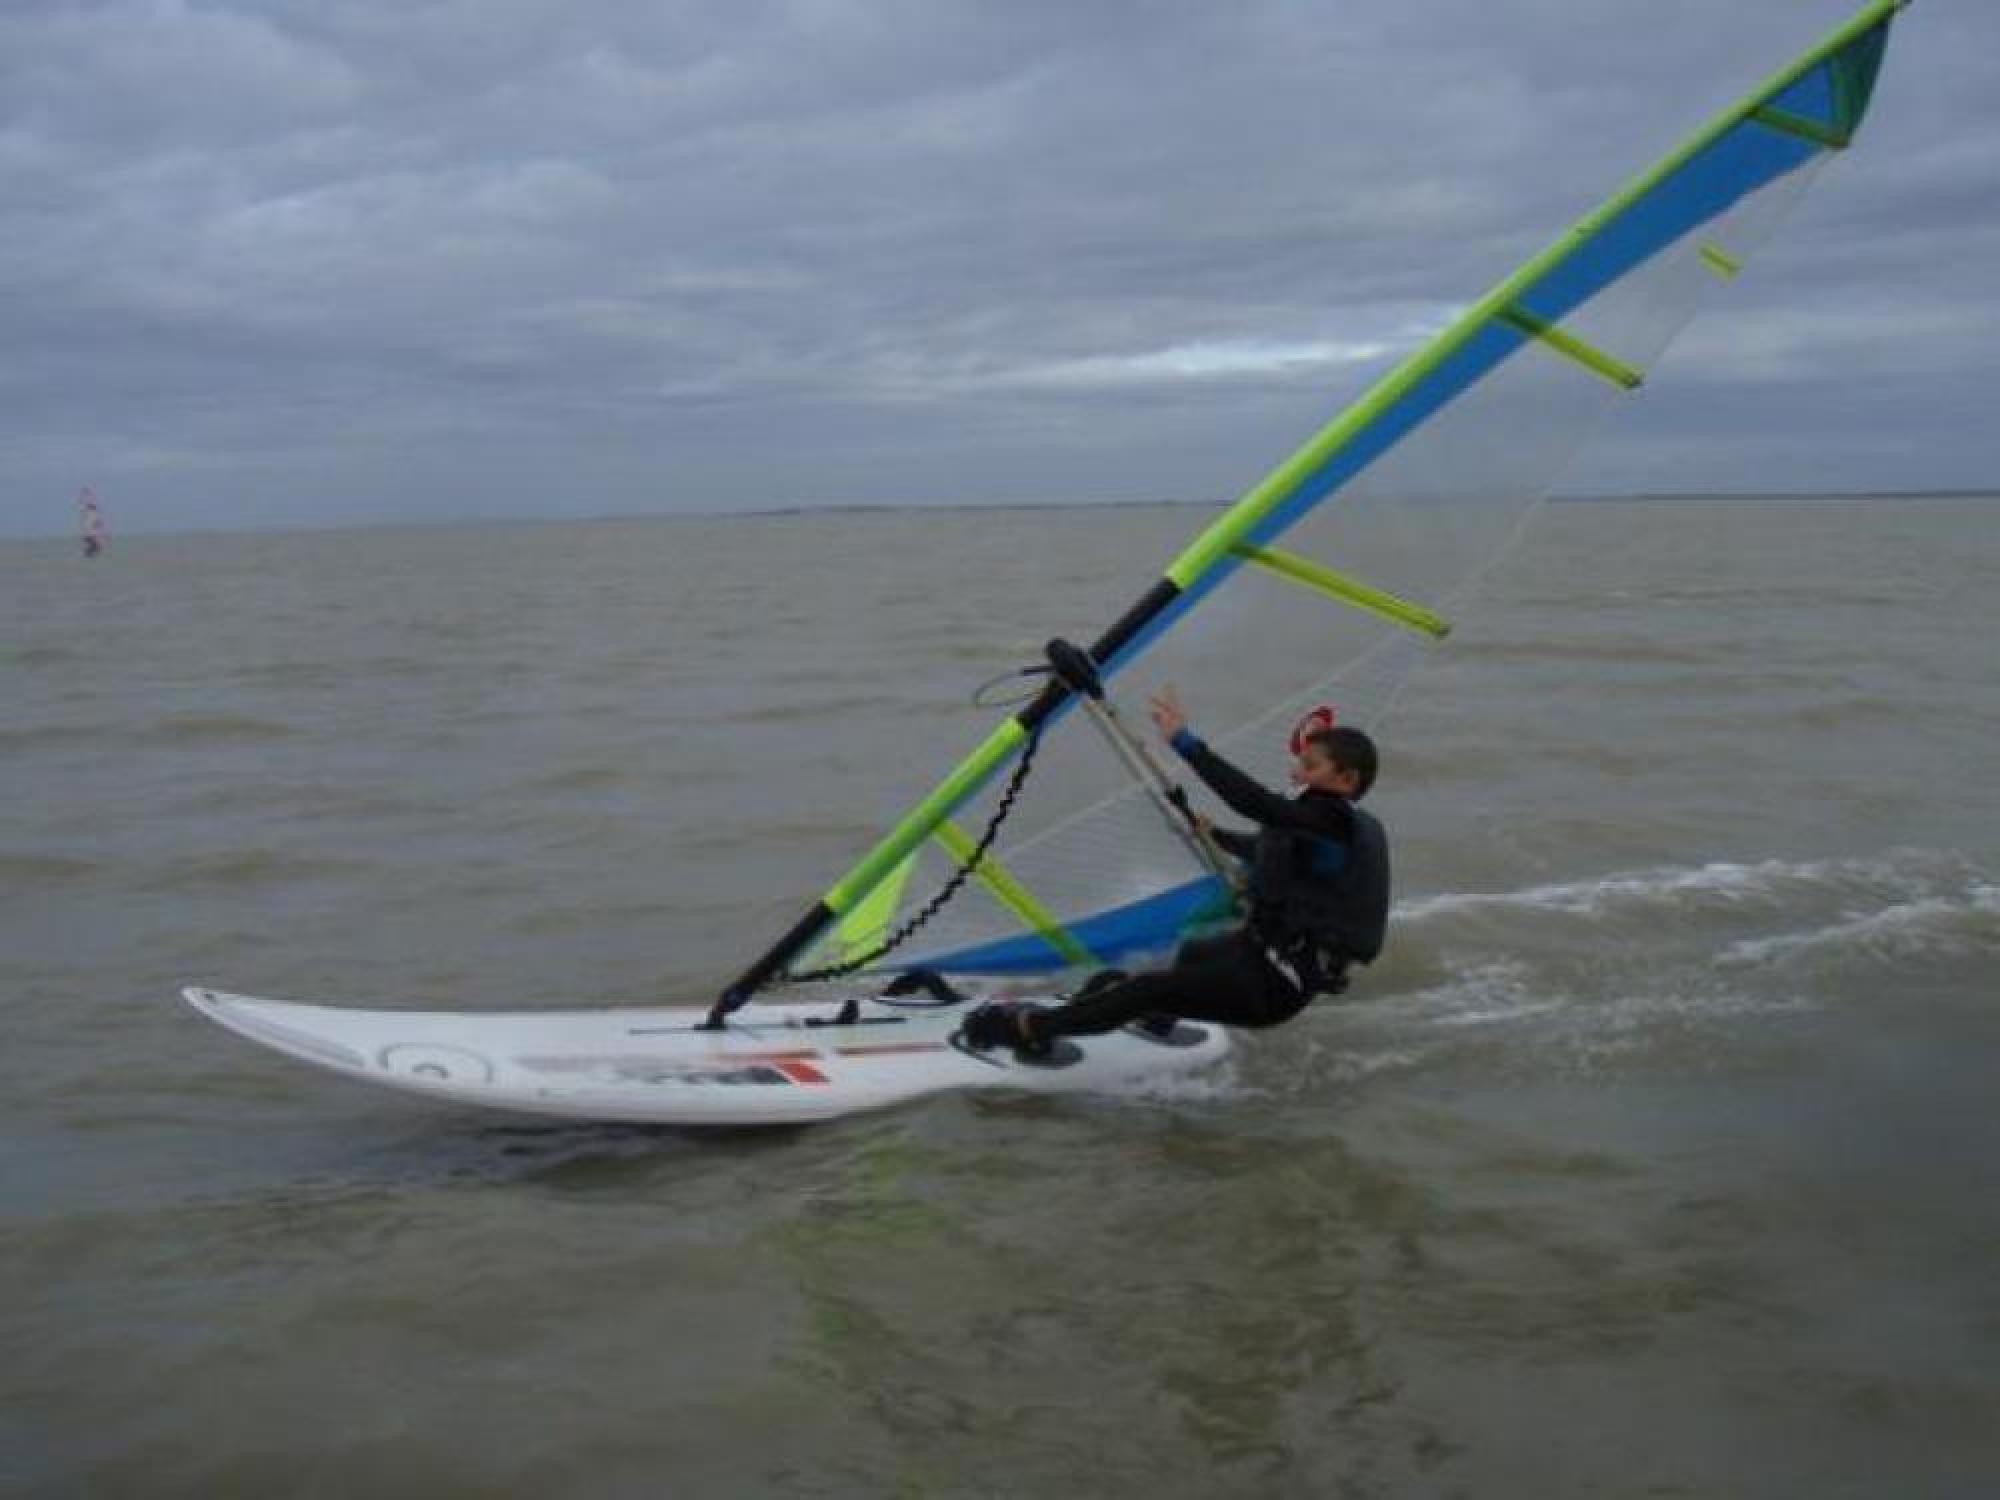 Fouras sailing school : Management and rental of sea kayaks and SUP near the Hotel La Roseraie in Fouras